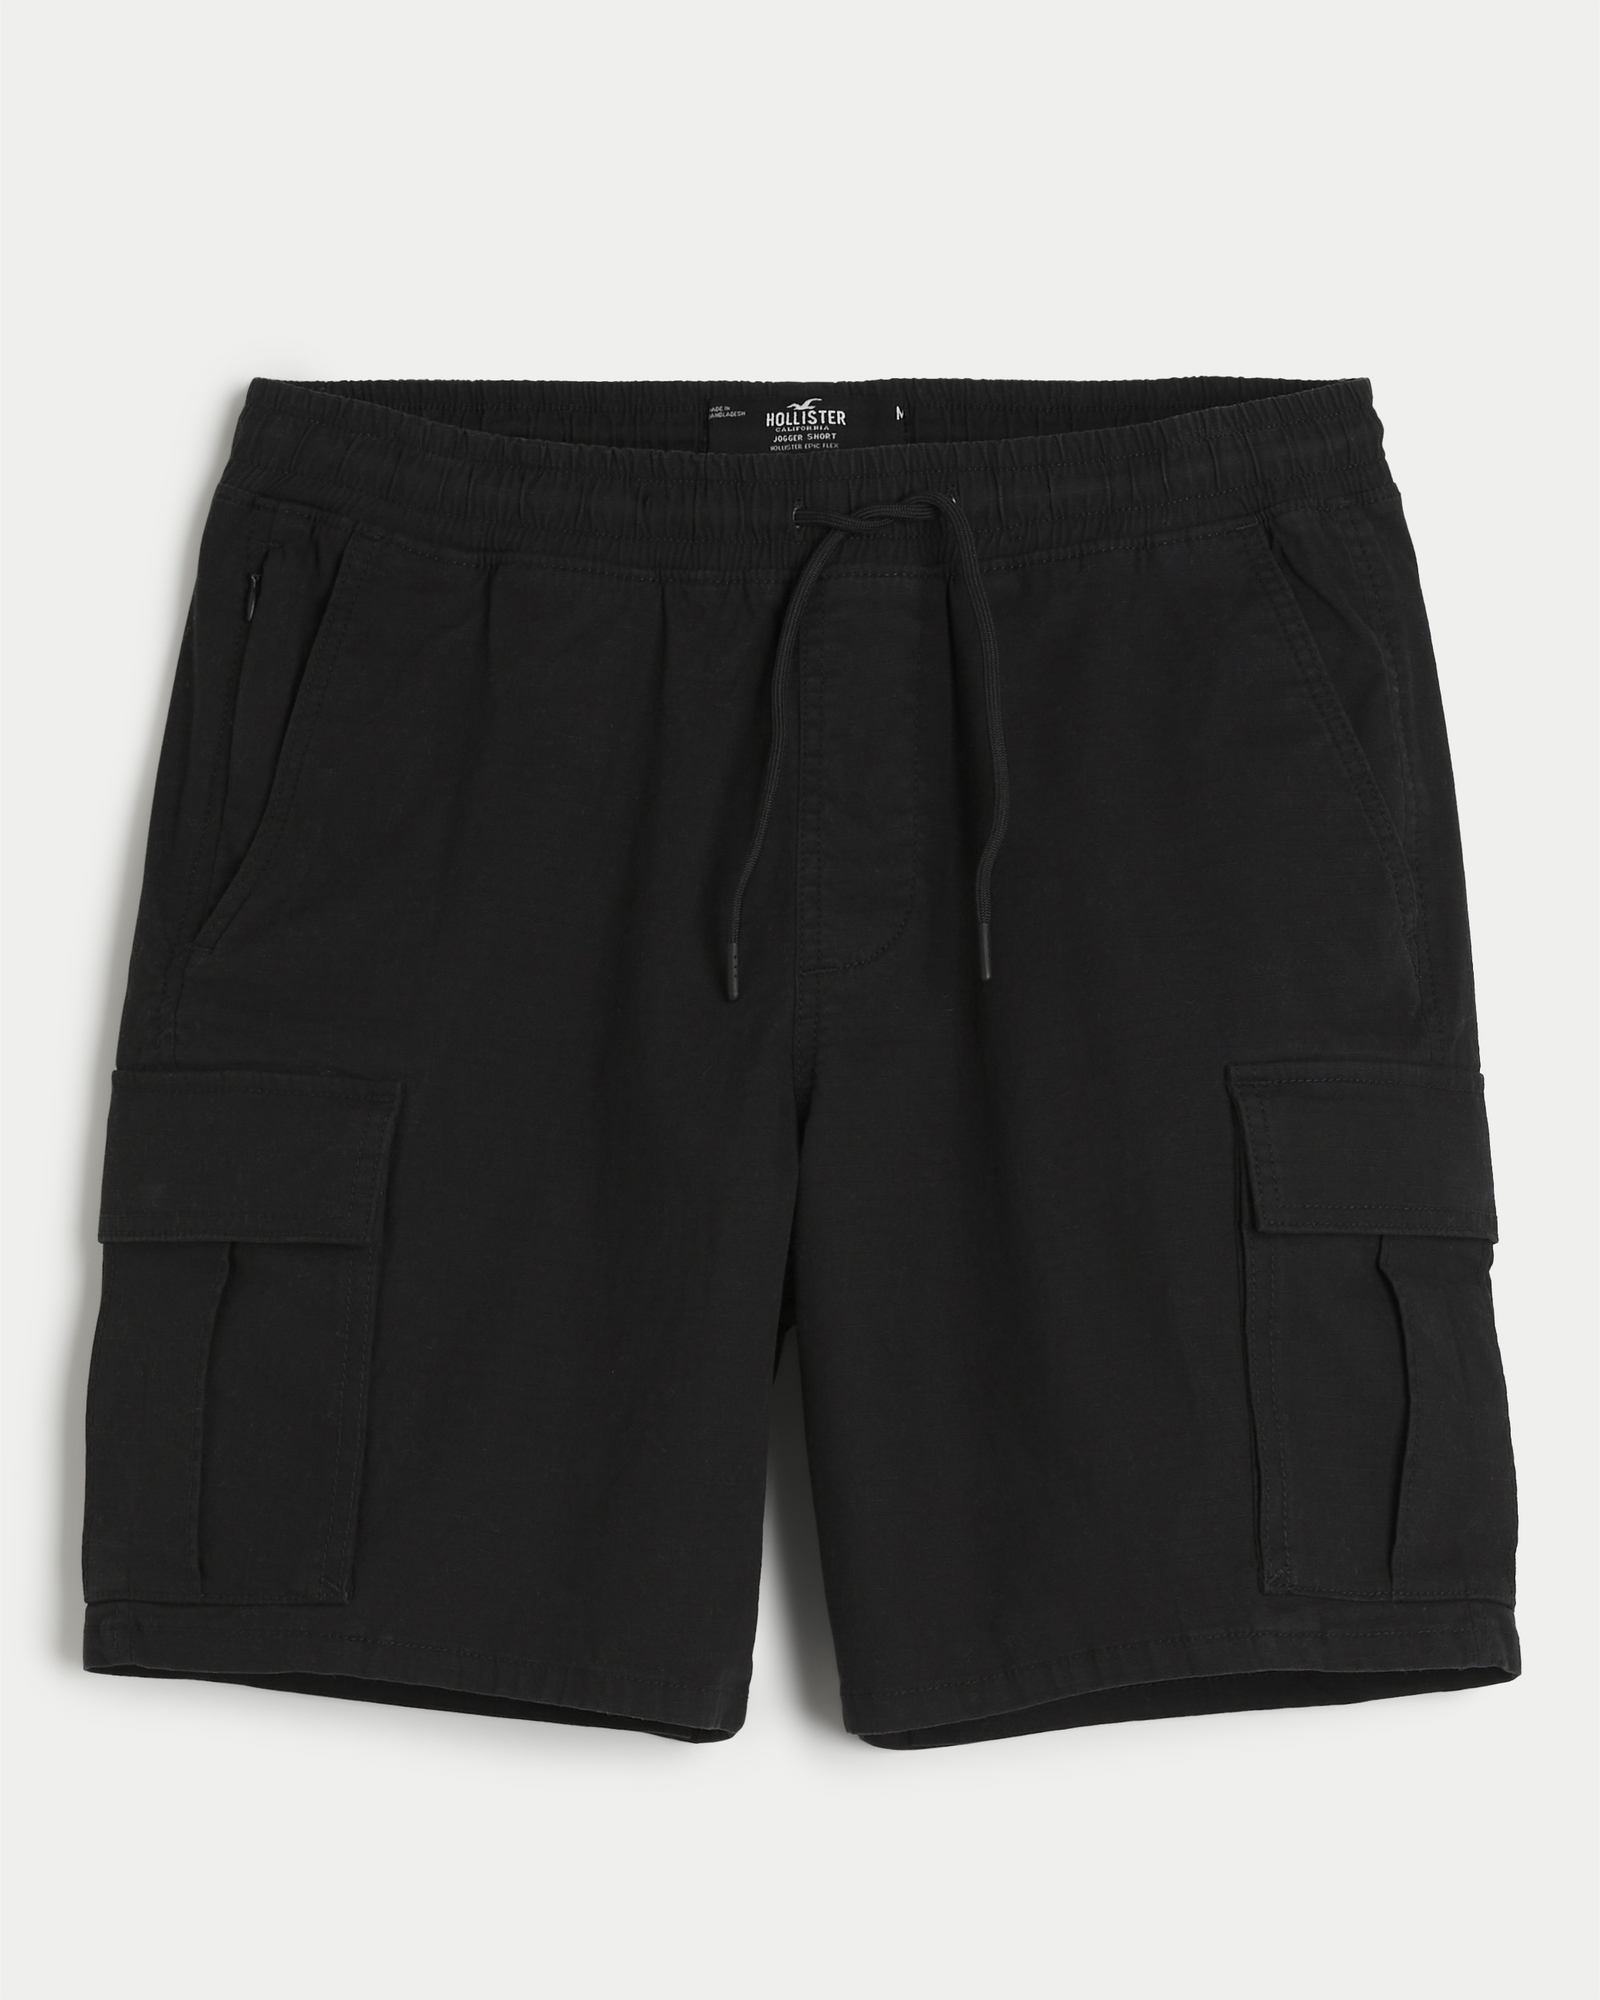 https://img.hollisterco.com/is/image/anf/KIC_328-3206-0481-900_prod1.jpg?policy=product-extra-large